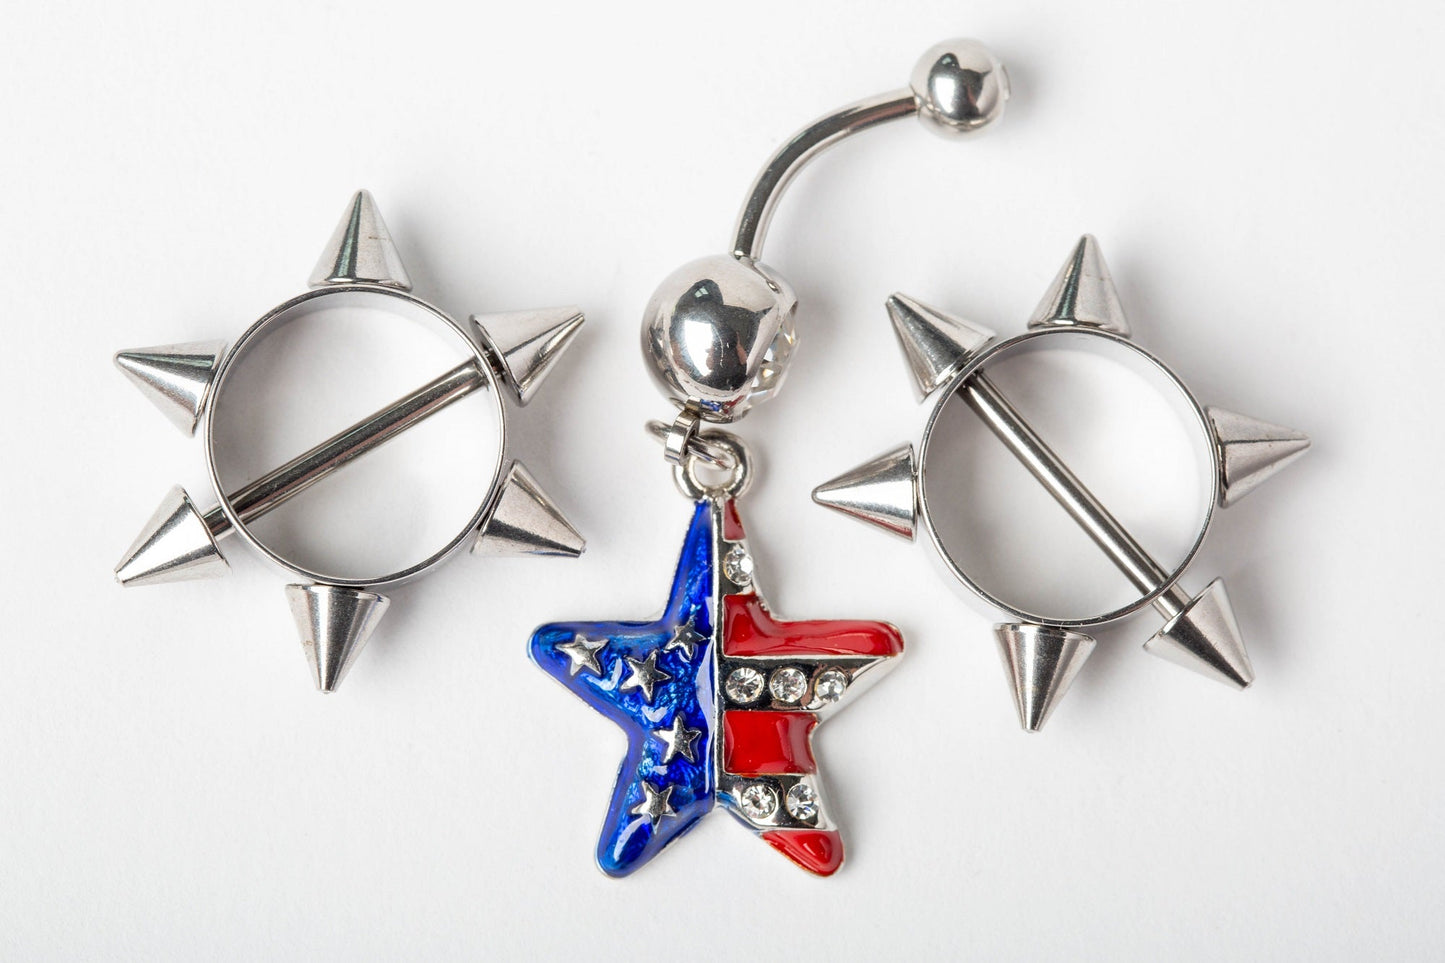 CZ Crystal American Flag Star Dangling Belly Button Ring - Stainless Steel